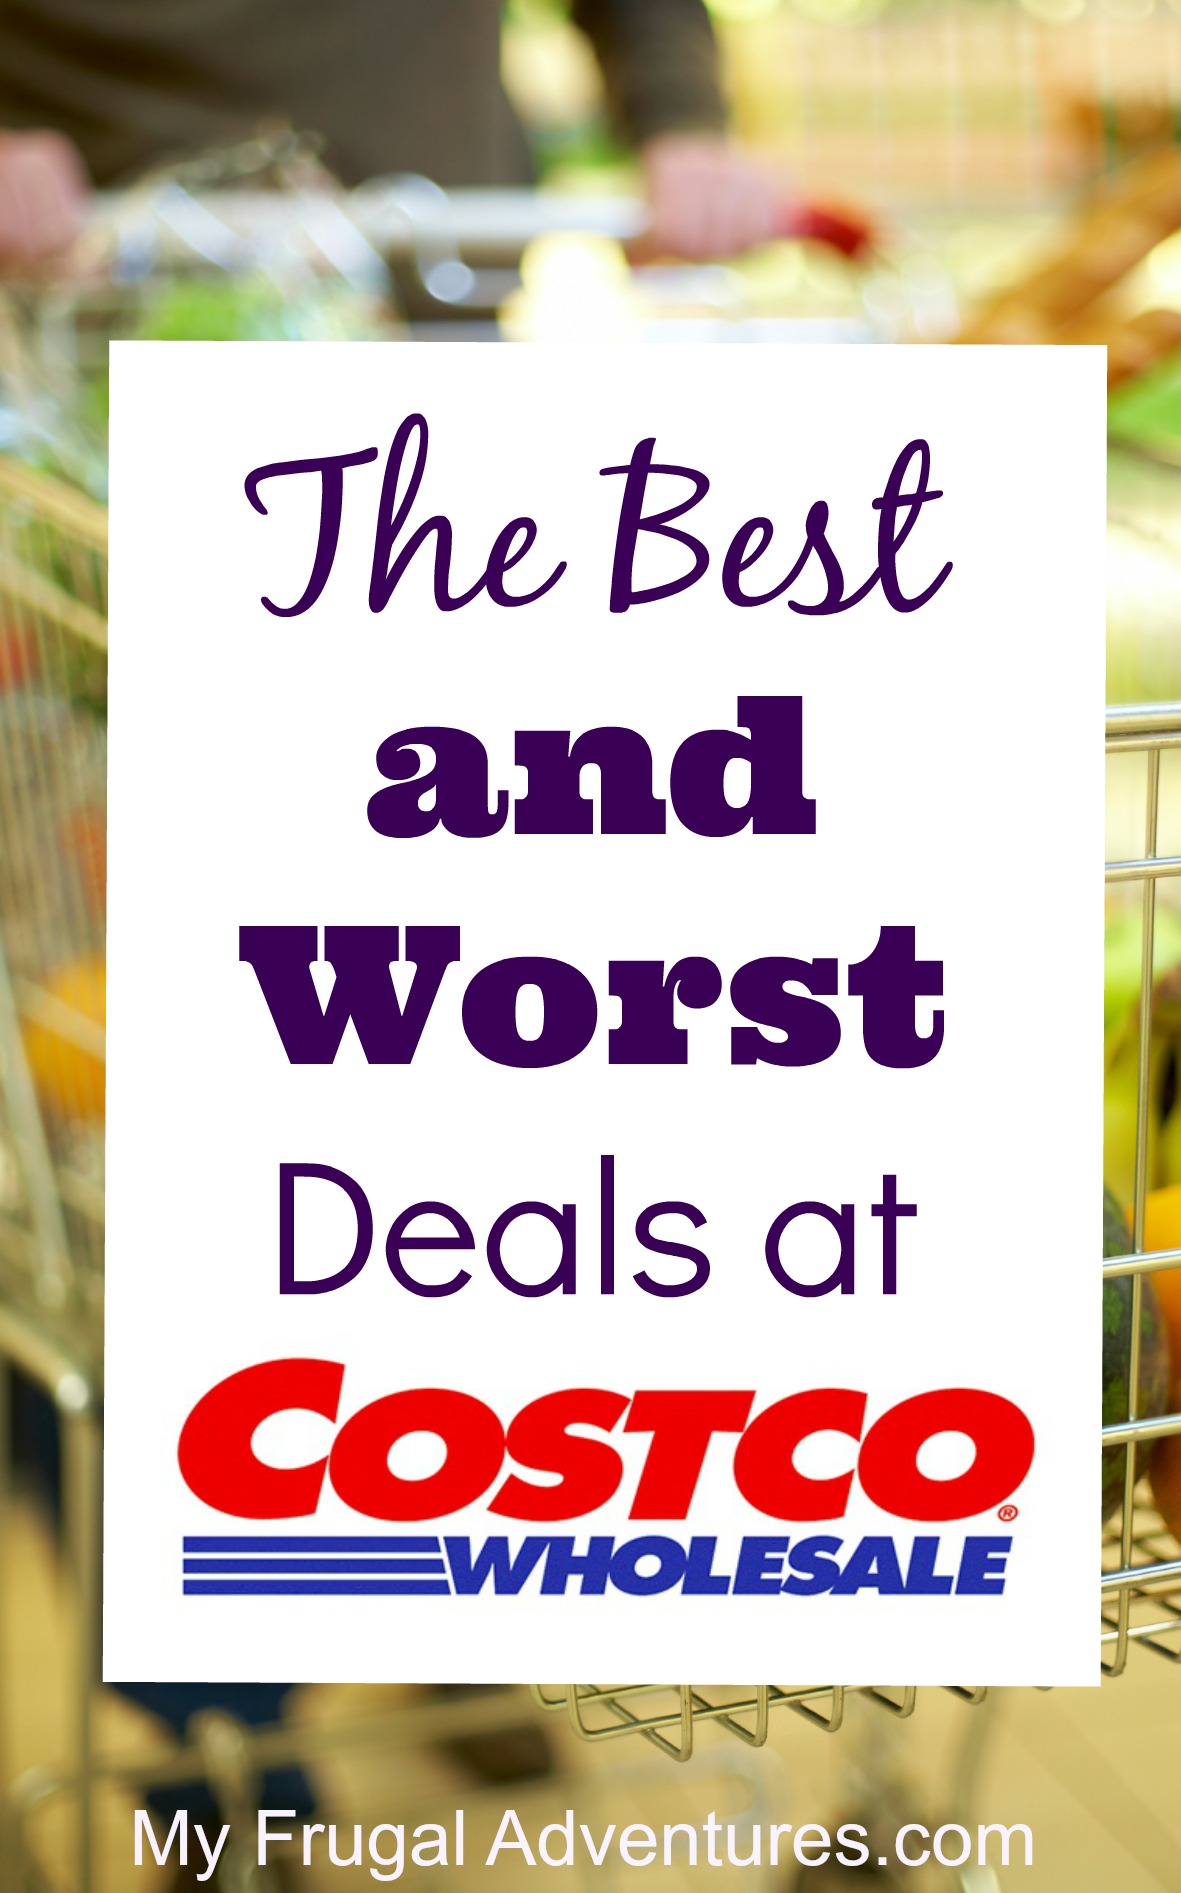 https://myfrugaladventures.com/wp-content/uploads/2014/09/The-Best-and-Worst-Deals-at-Costco-your-quick-reference-guide-on-what-to-look-for-and-what-to-avoid..jpg